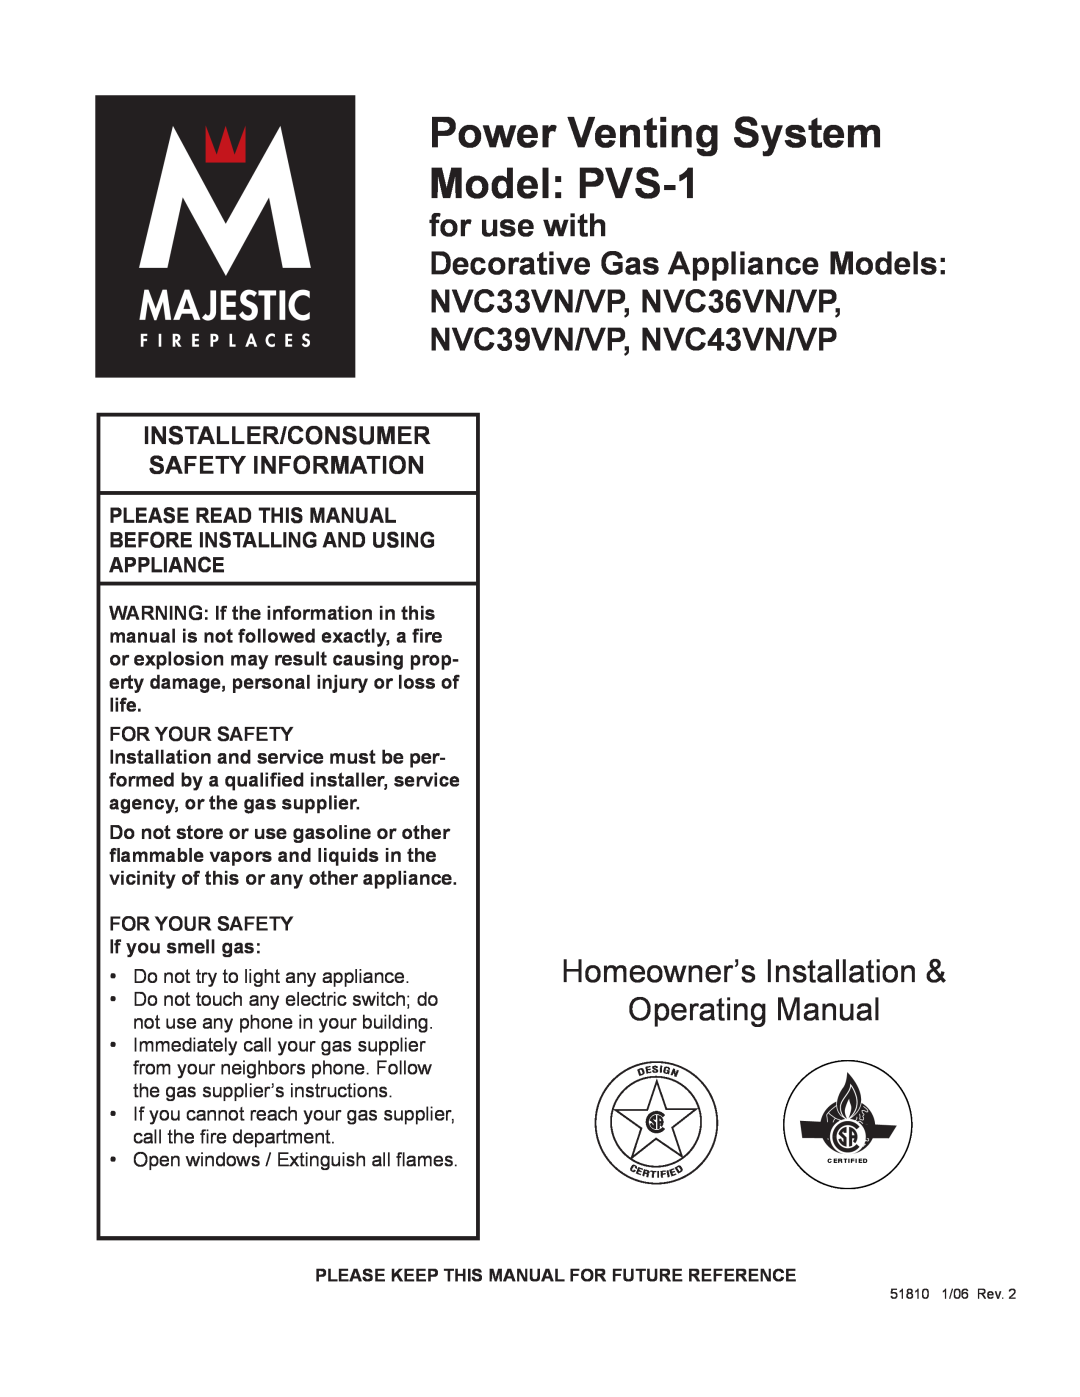 CFM Corporation PVS-1 manual Please Read This Manual Before Installing And Using Appliance, for use with 